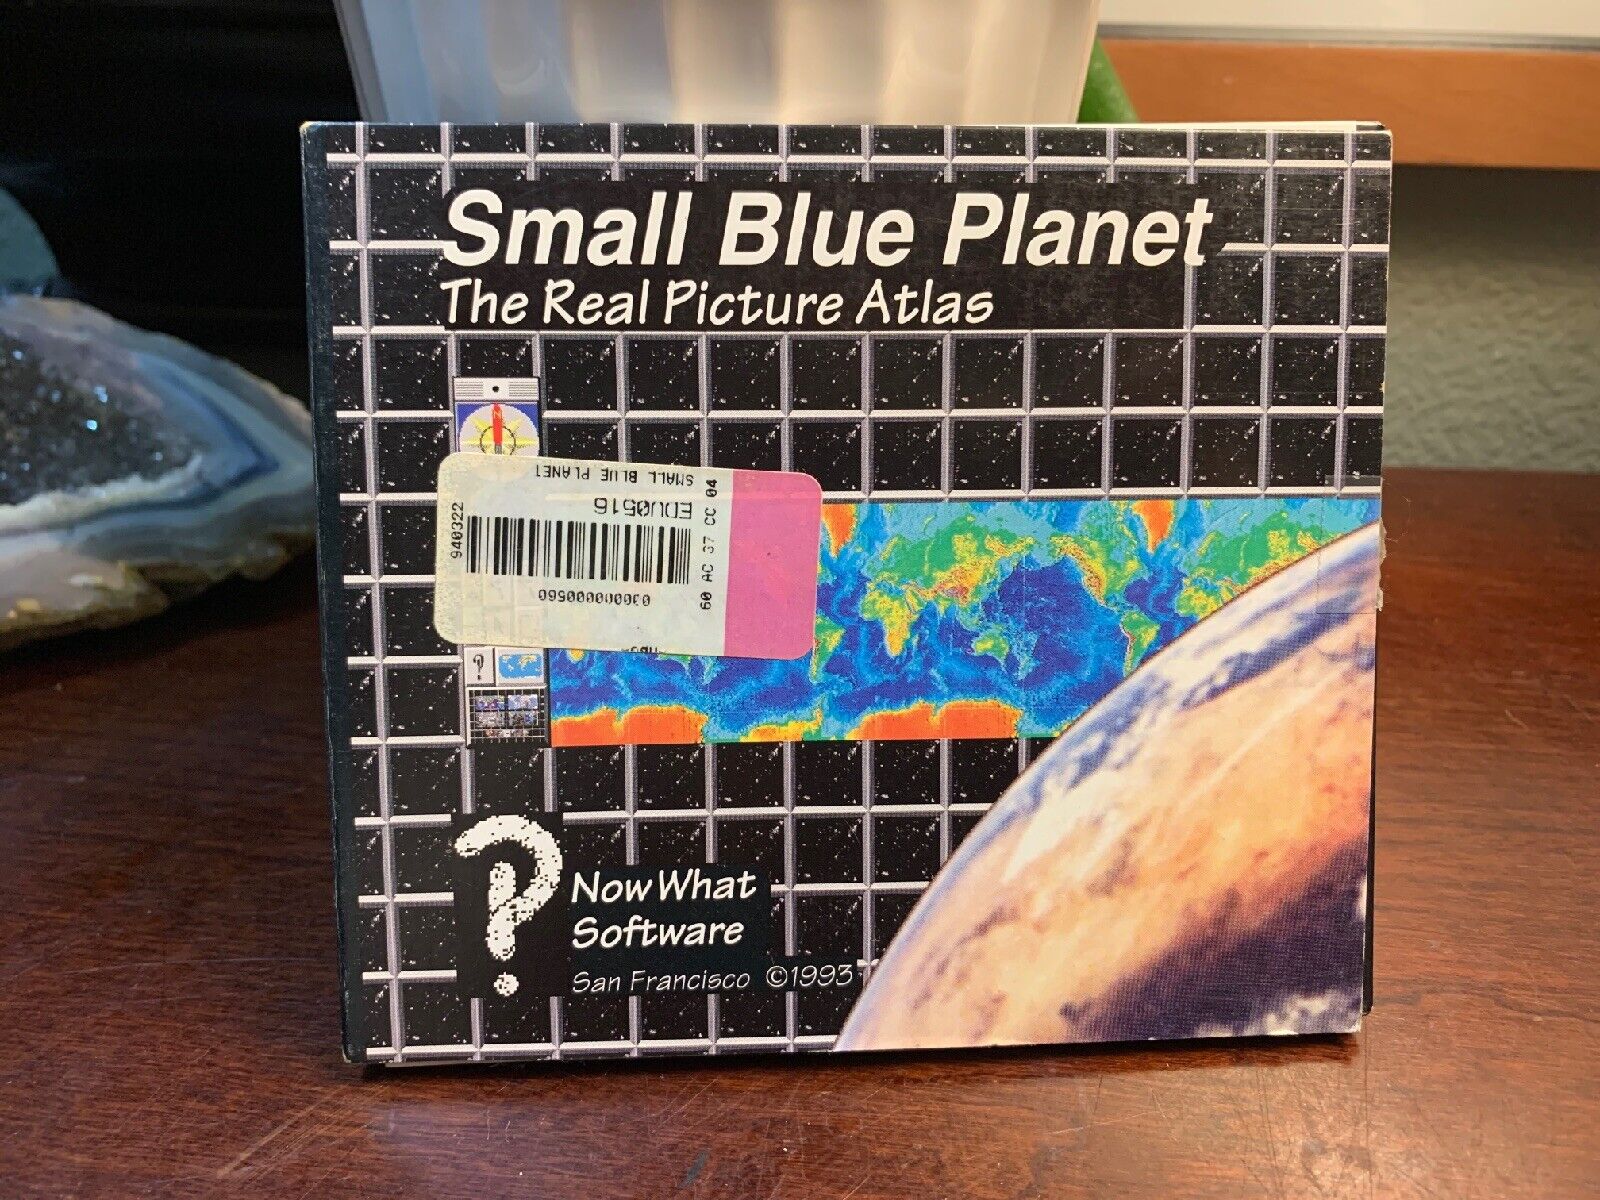 VINTAGE 1993 Small Blue Planet The Real Picture Atlas MACINTOSH Cd-Rom RARE